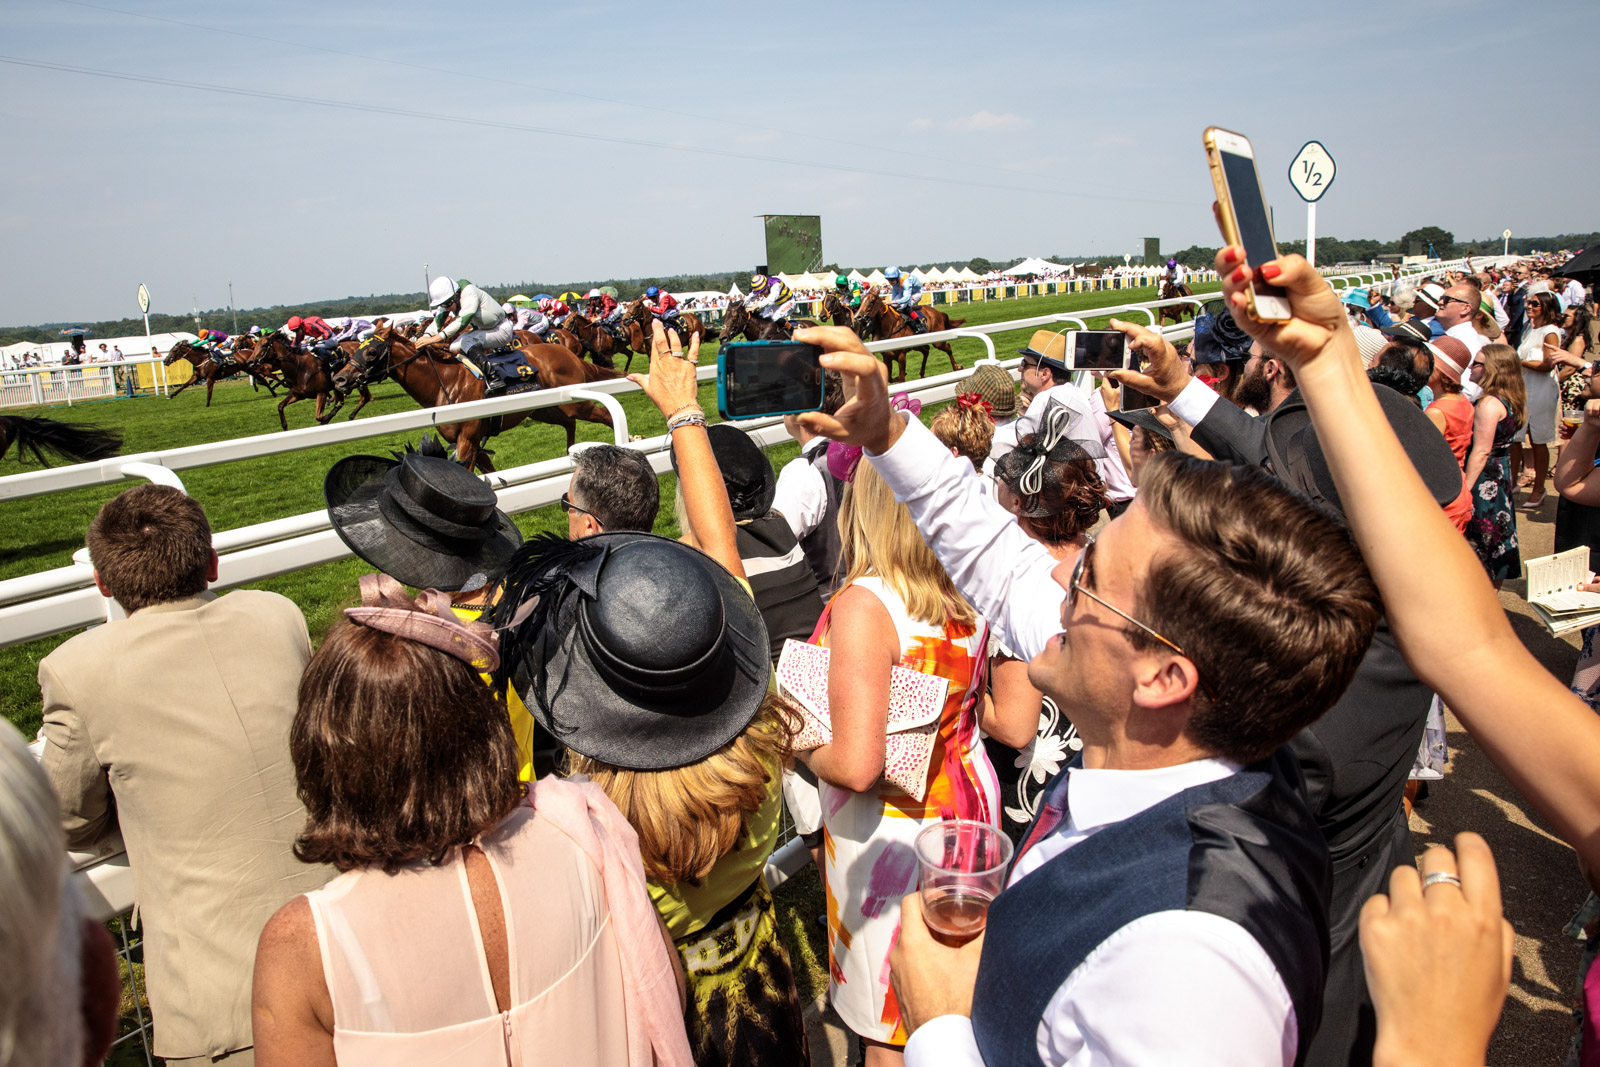  Racegoers take pictures during a race at Royal Ascot 2017 at Ascot Racecourse on June 21, 2017 in Ascot. 